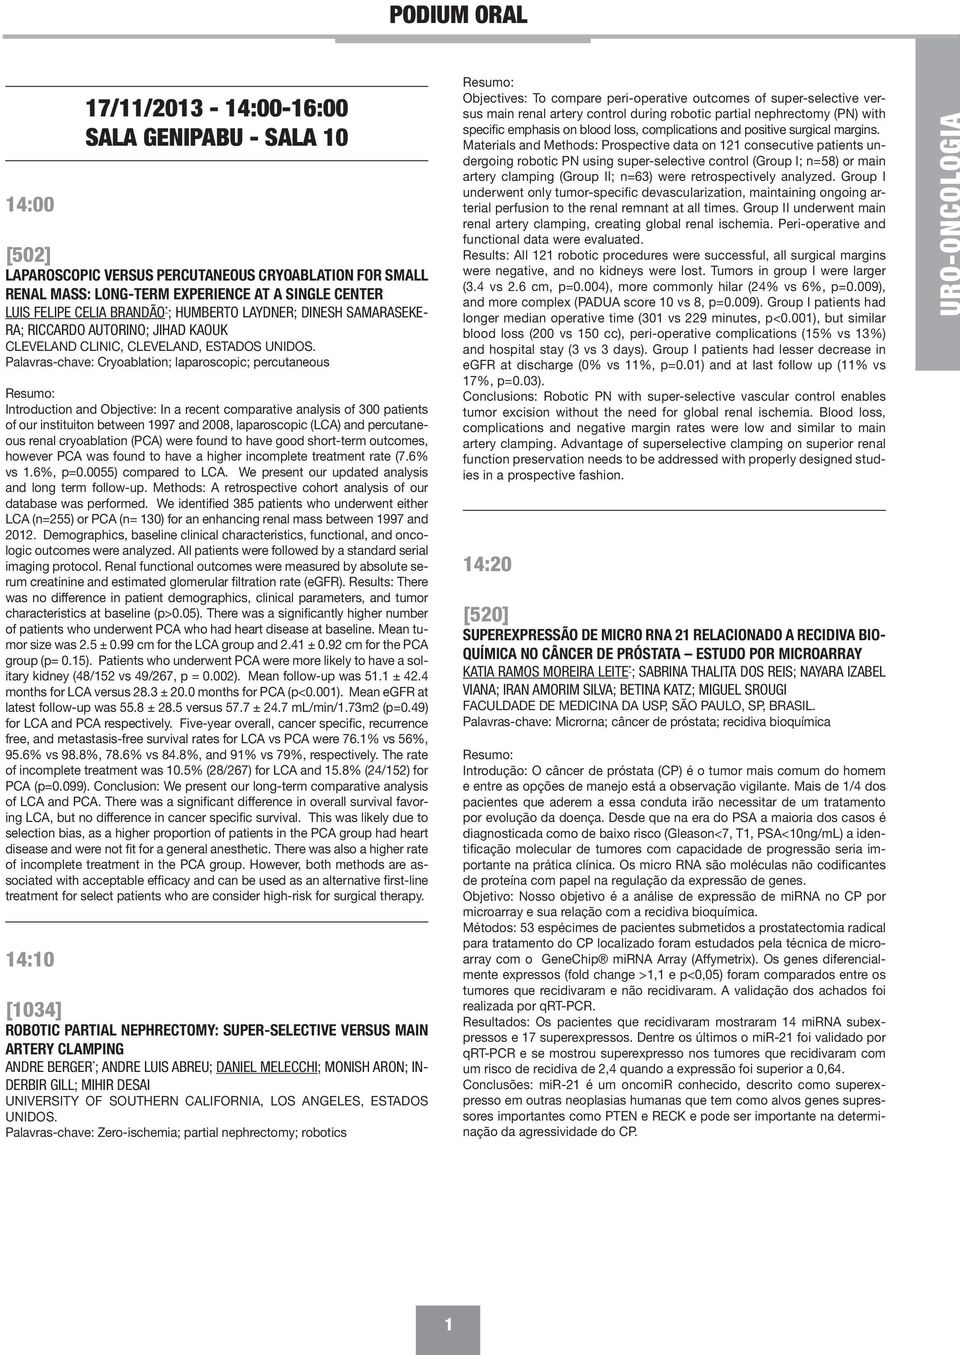 Palavras-chave: Cryoablation; laparoscopic; percutaneous Introduction and Objective: In a recent comparative analysis of 300 patients of our instituiton between 1997 and 2008, laparoscopic (LCA) and